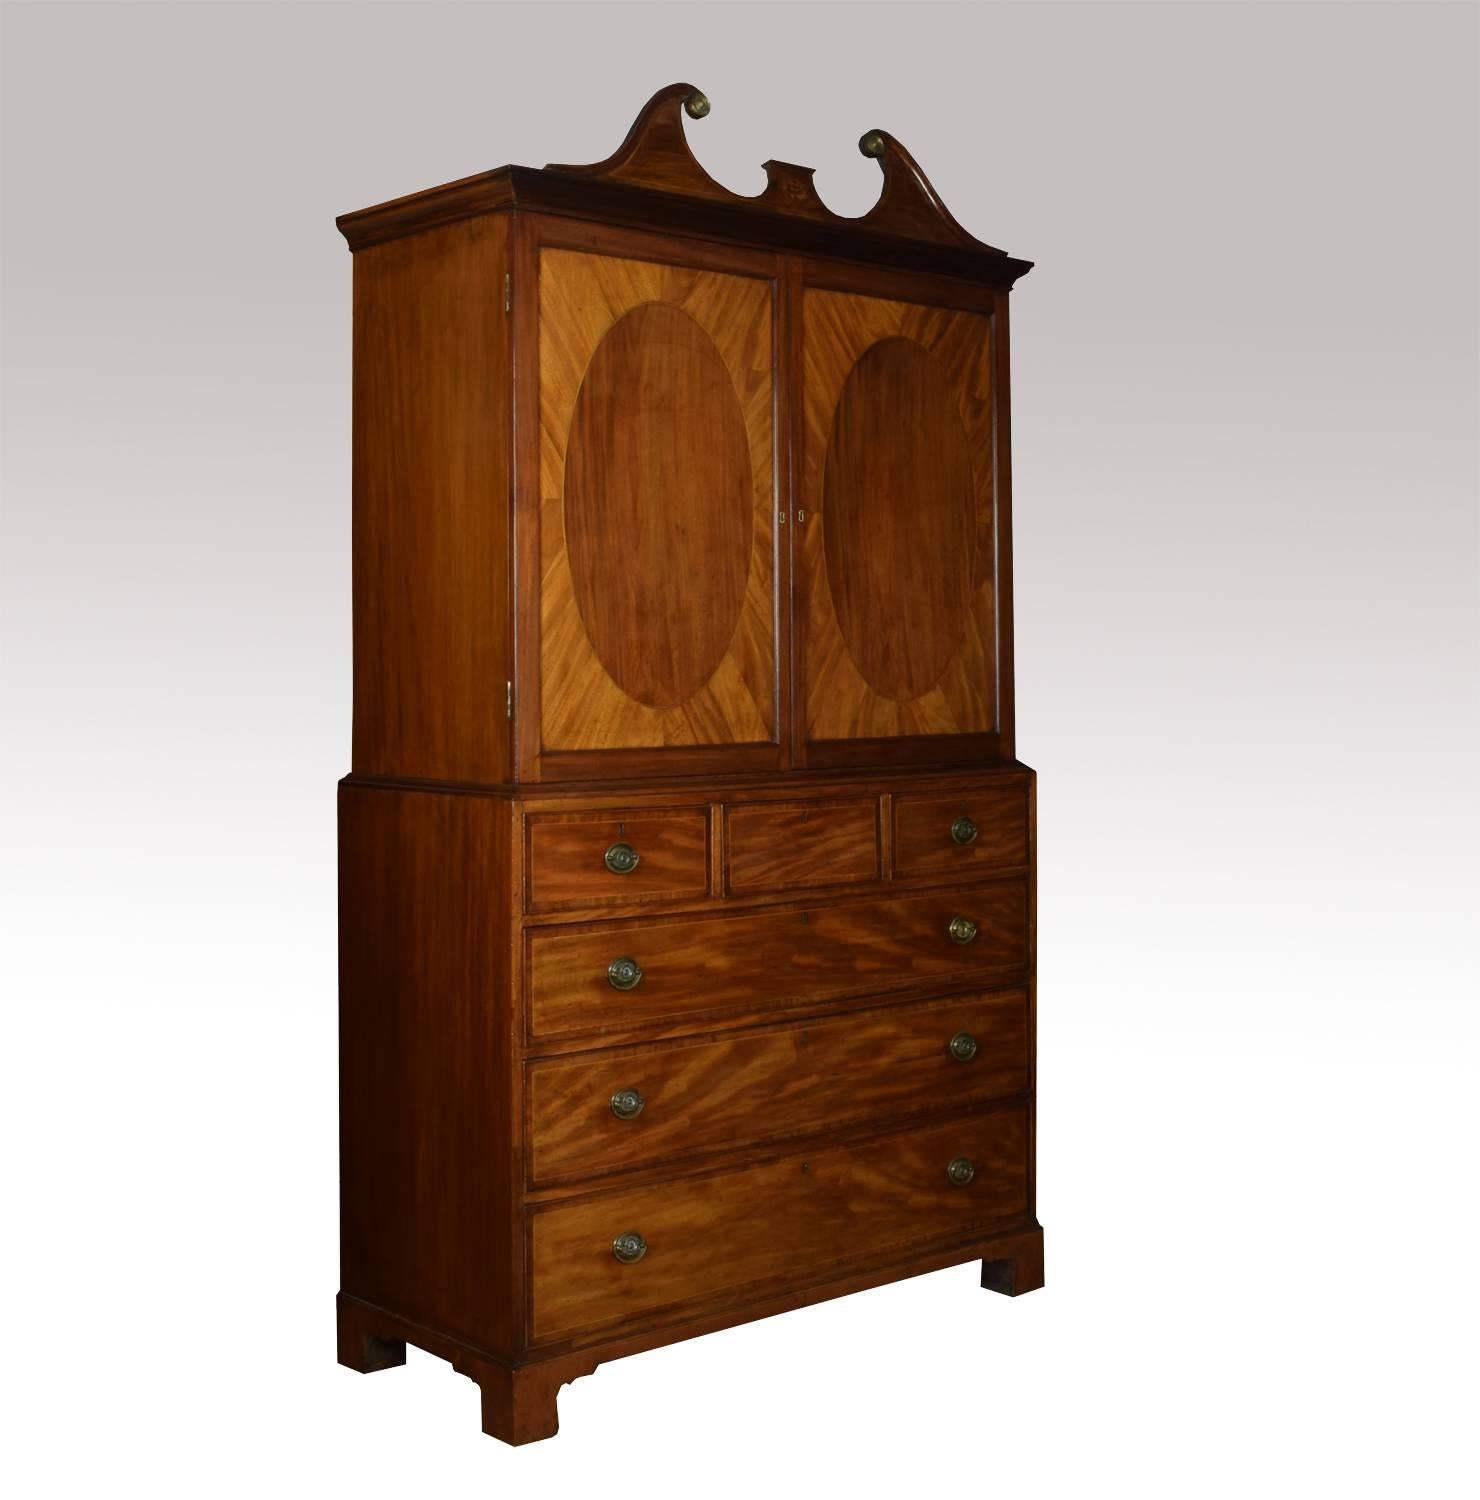 Fine 18th century George III period mahogany gentleman’s cabinet on chest with inlaid swan neck pediment above two oval paneled doors opening to reveal five graduated draws. The base section fitted with three short and three long graduated draws all